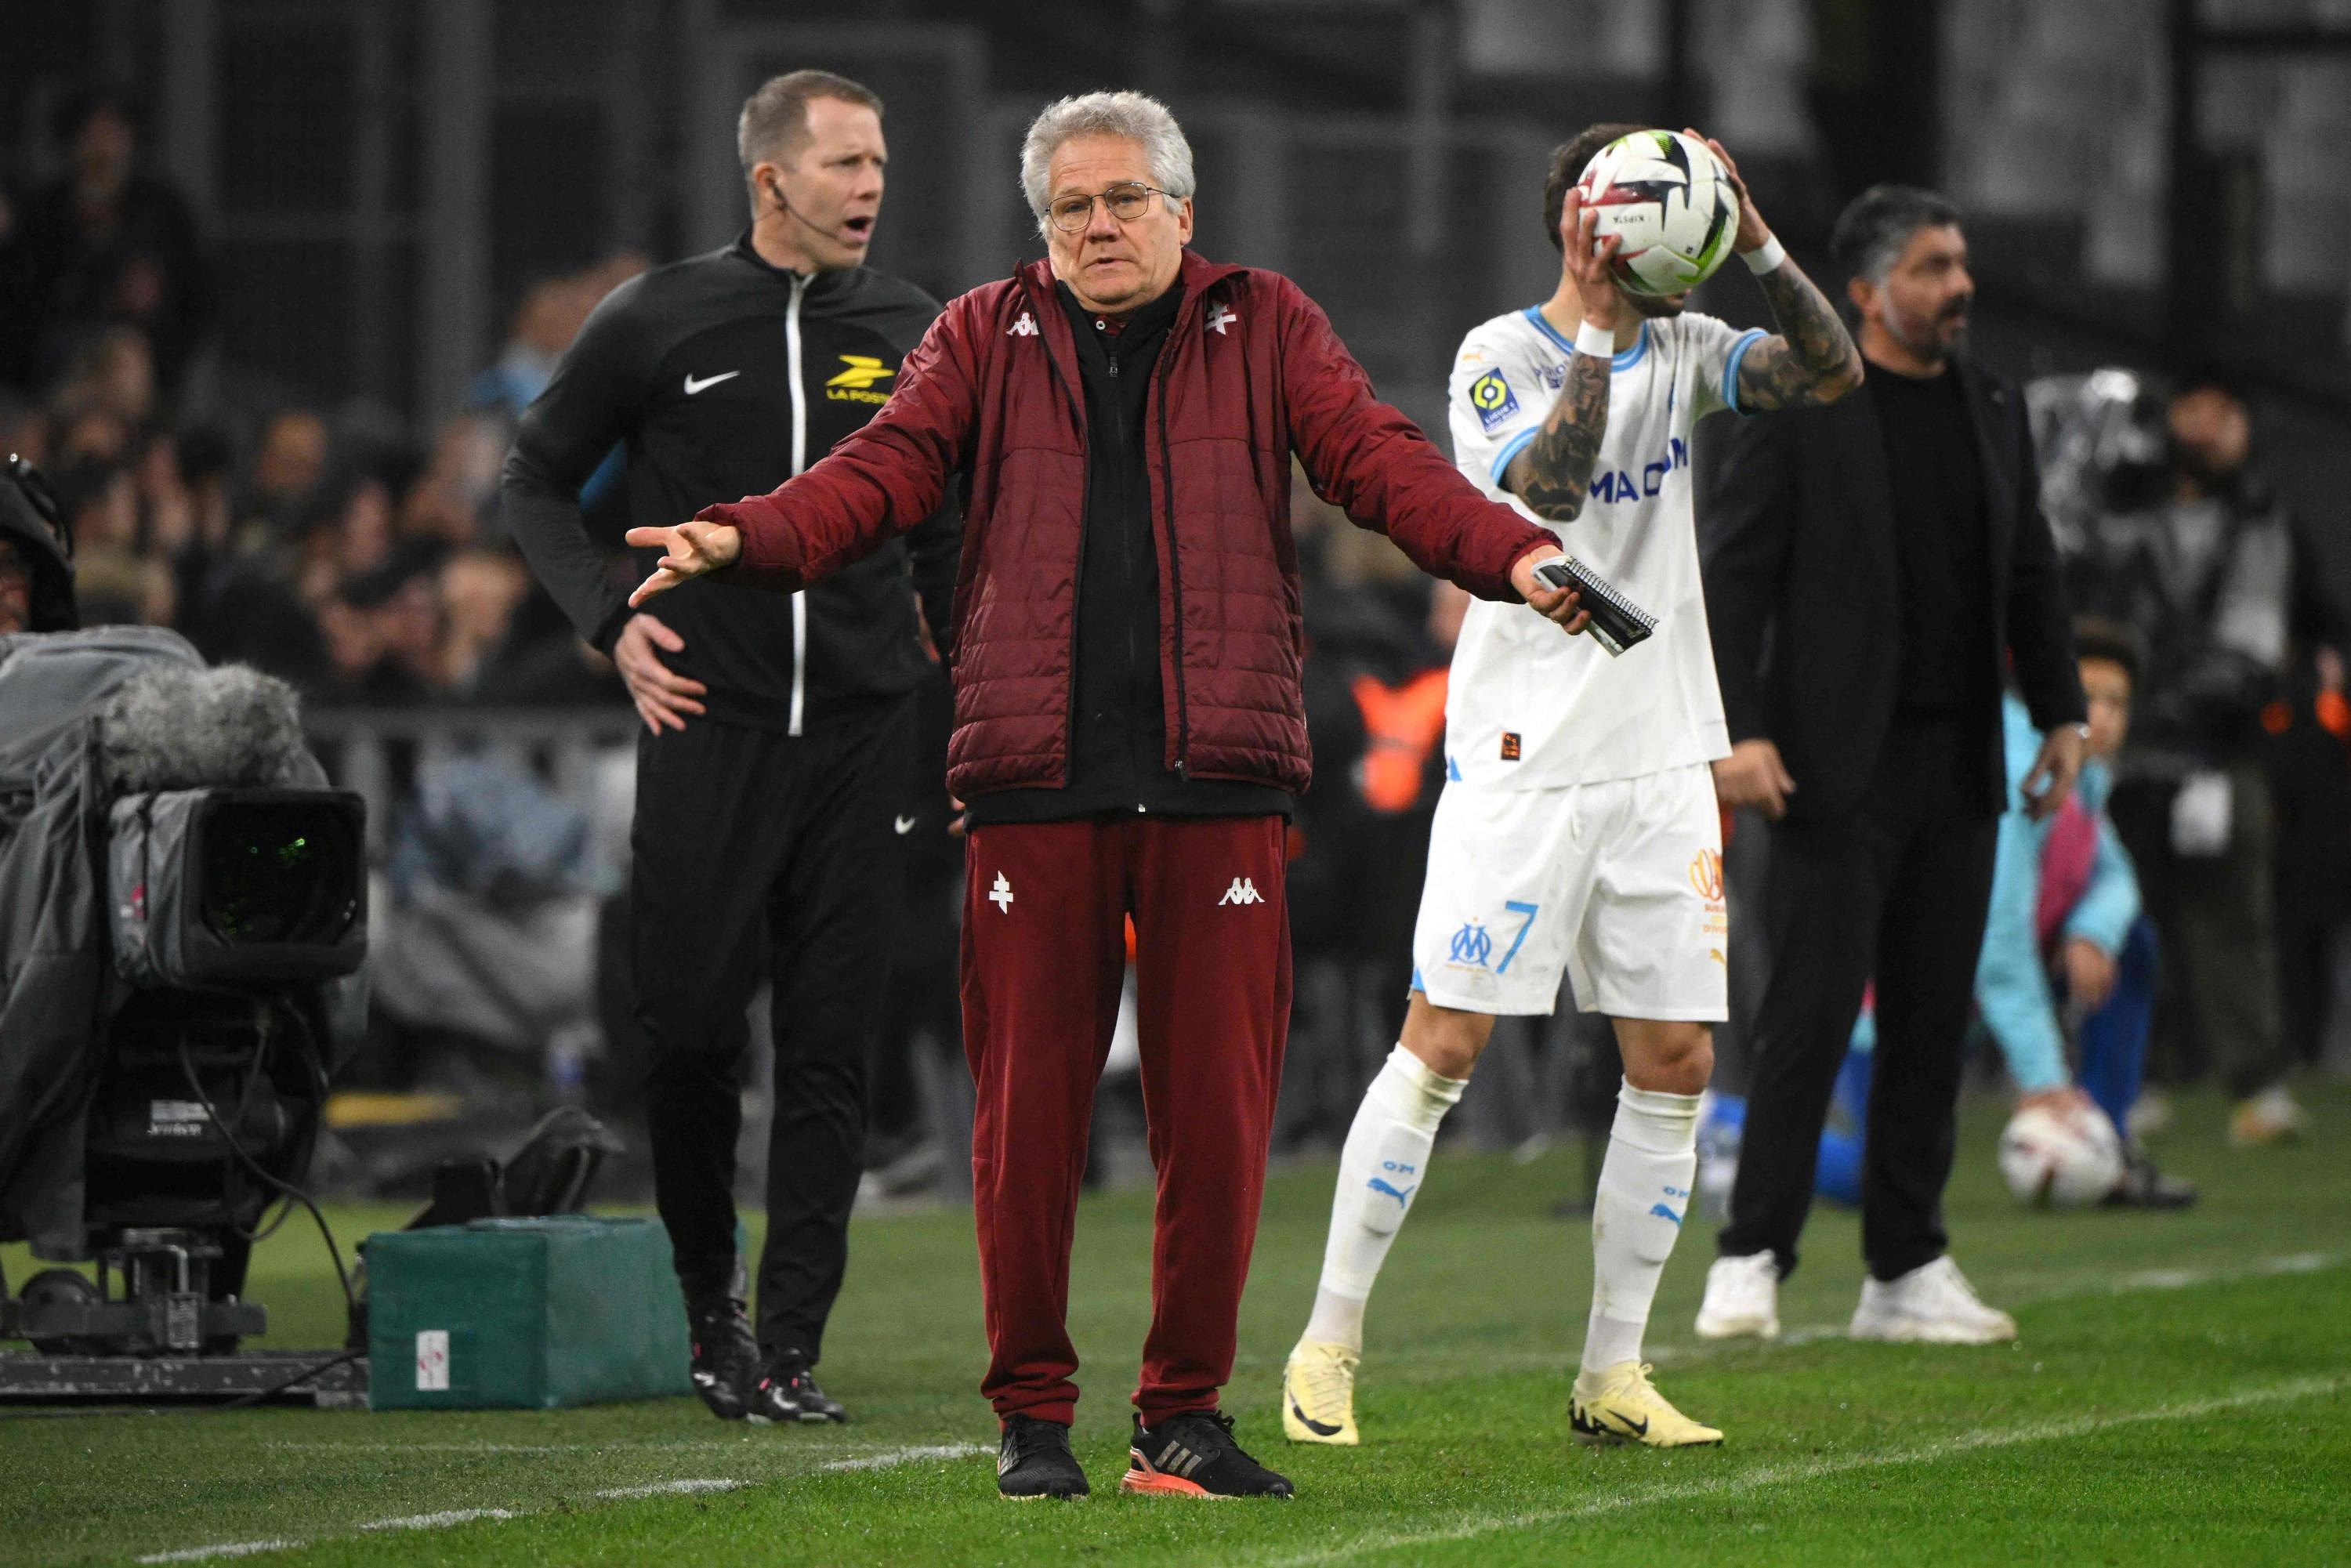 OM-Metz: a point that “gives morale” for Bölöni and the Messins